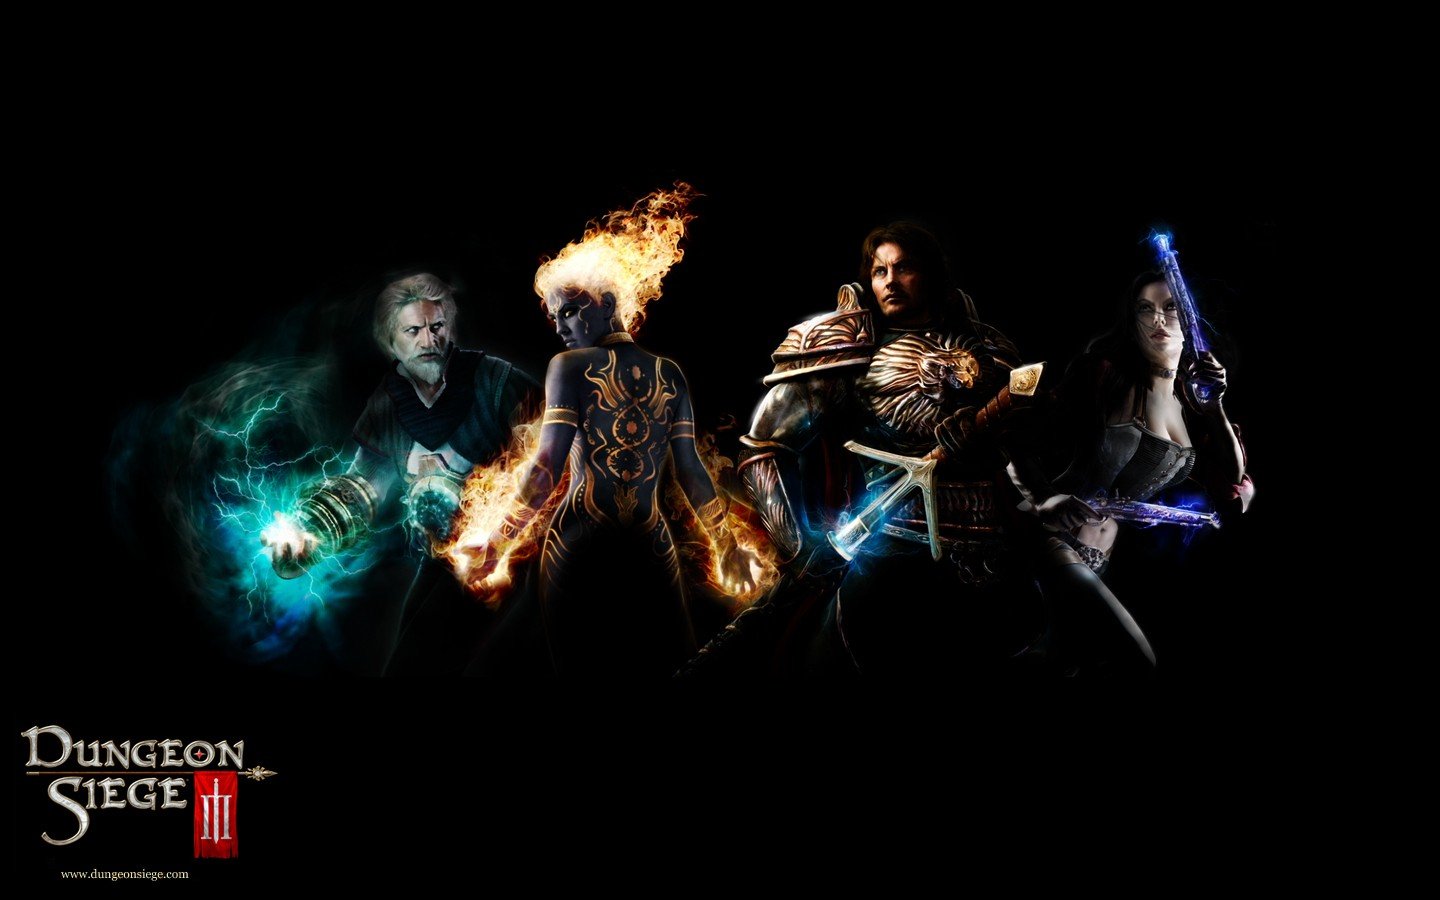 Dungeon Siege 3 Wallpapers Dungeon Siege 3 Myspace Backgrounds 1440x900